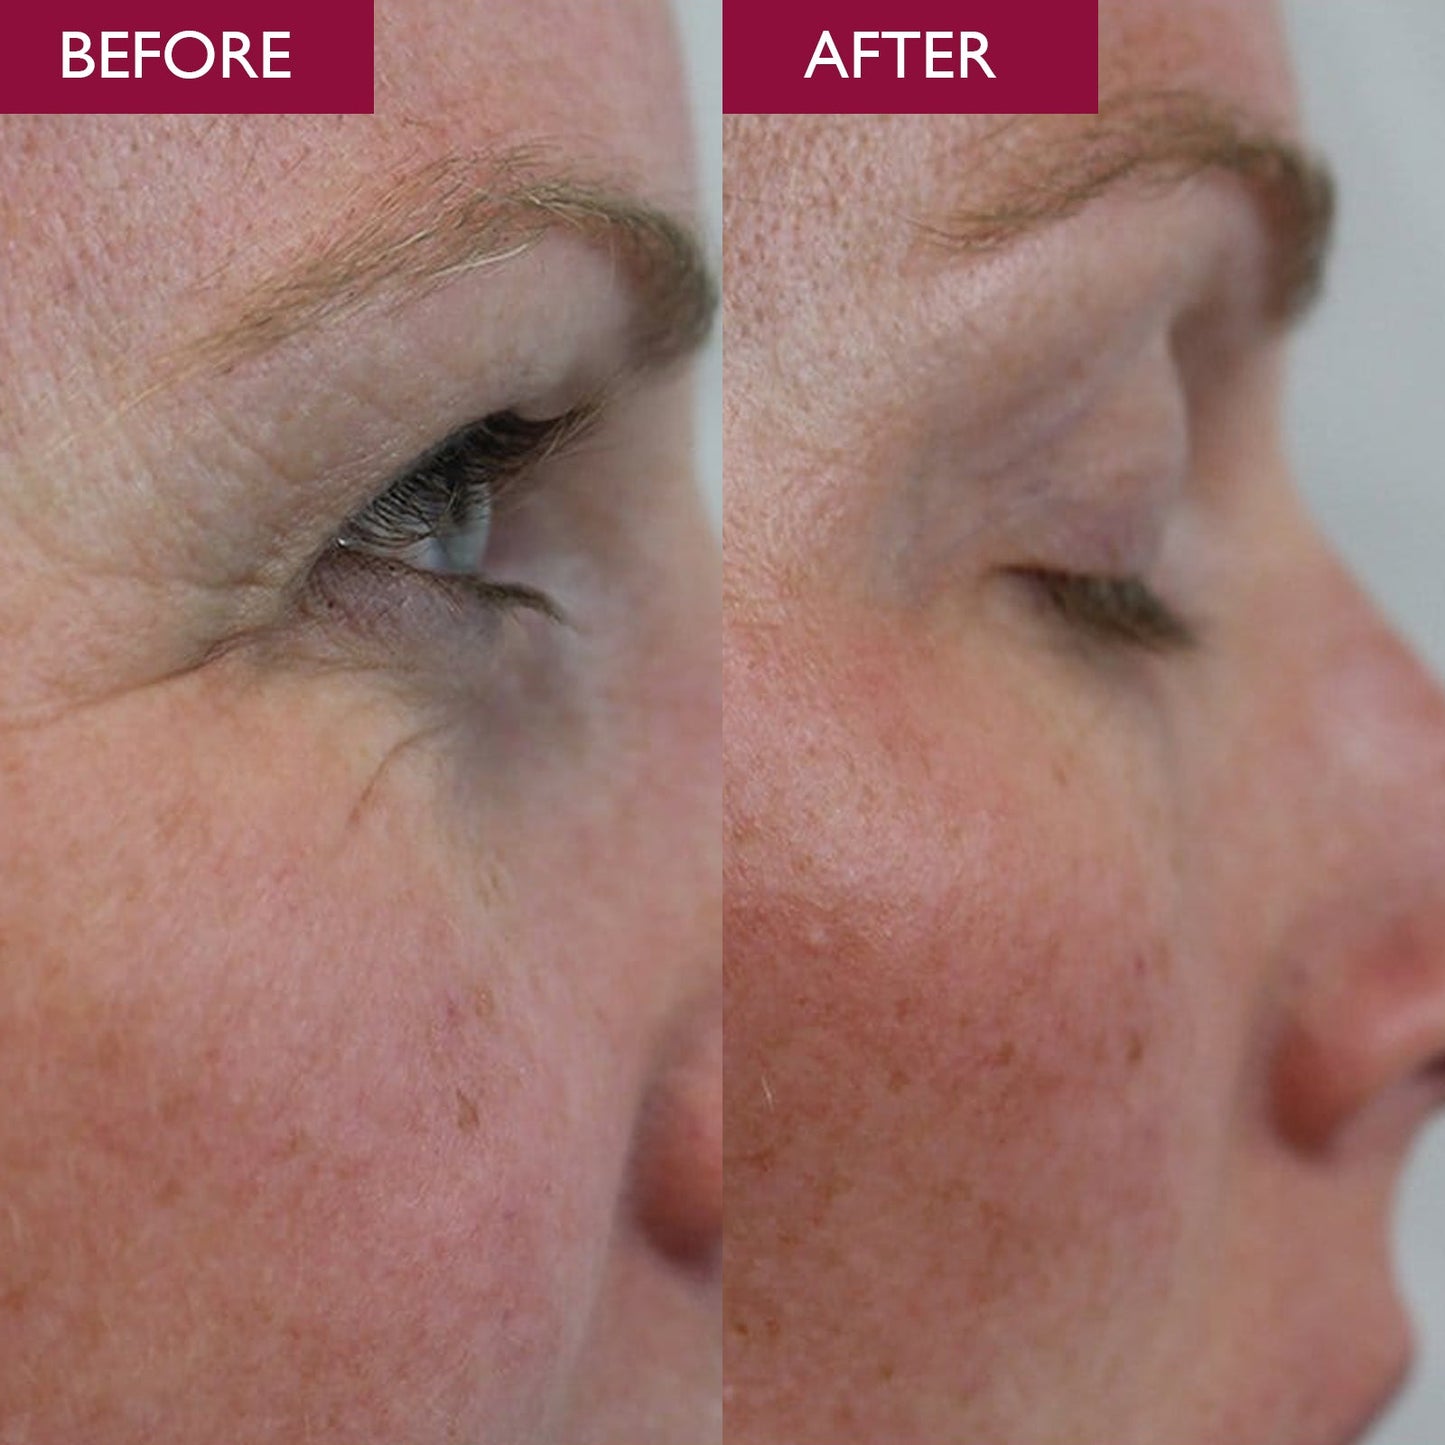 Before and after image of a women with wrinkles and darkness around the eye area.  Visible improvement can be seen after using the advanced eye cream from Skinician.